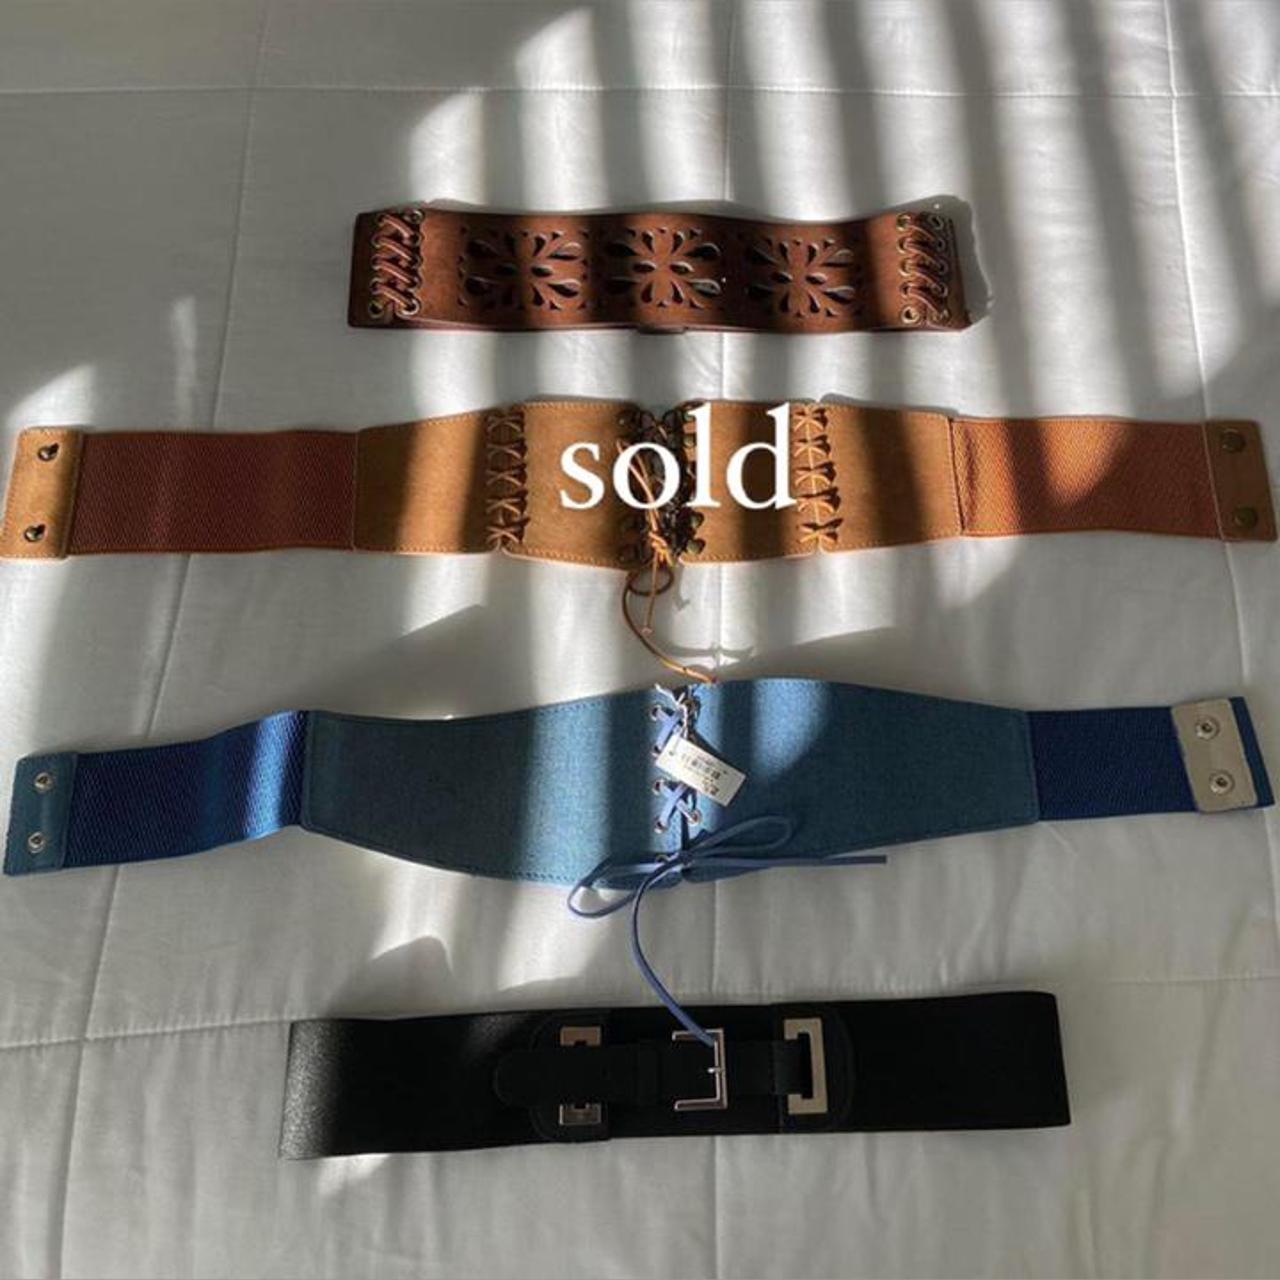 Product Image 1 - Belts!

Making one post for all